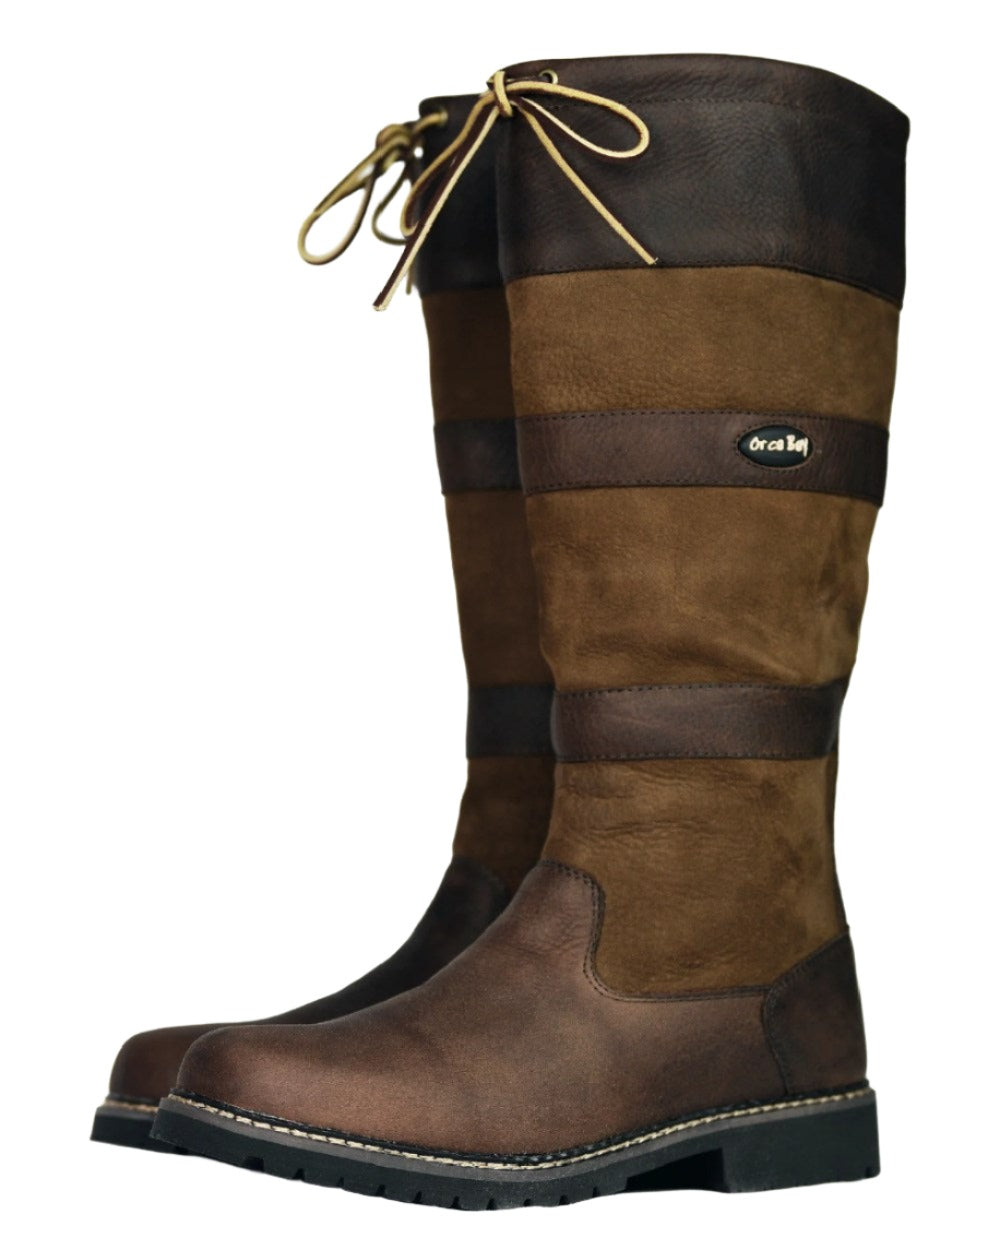 Brown Coloured Orca Bay Orkney R-Fit Country Boots On A White Background